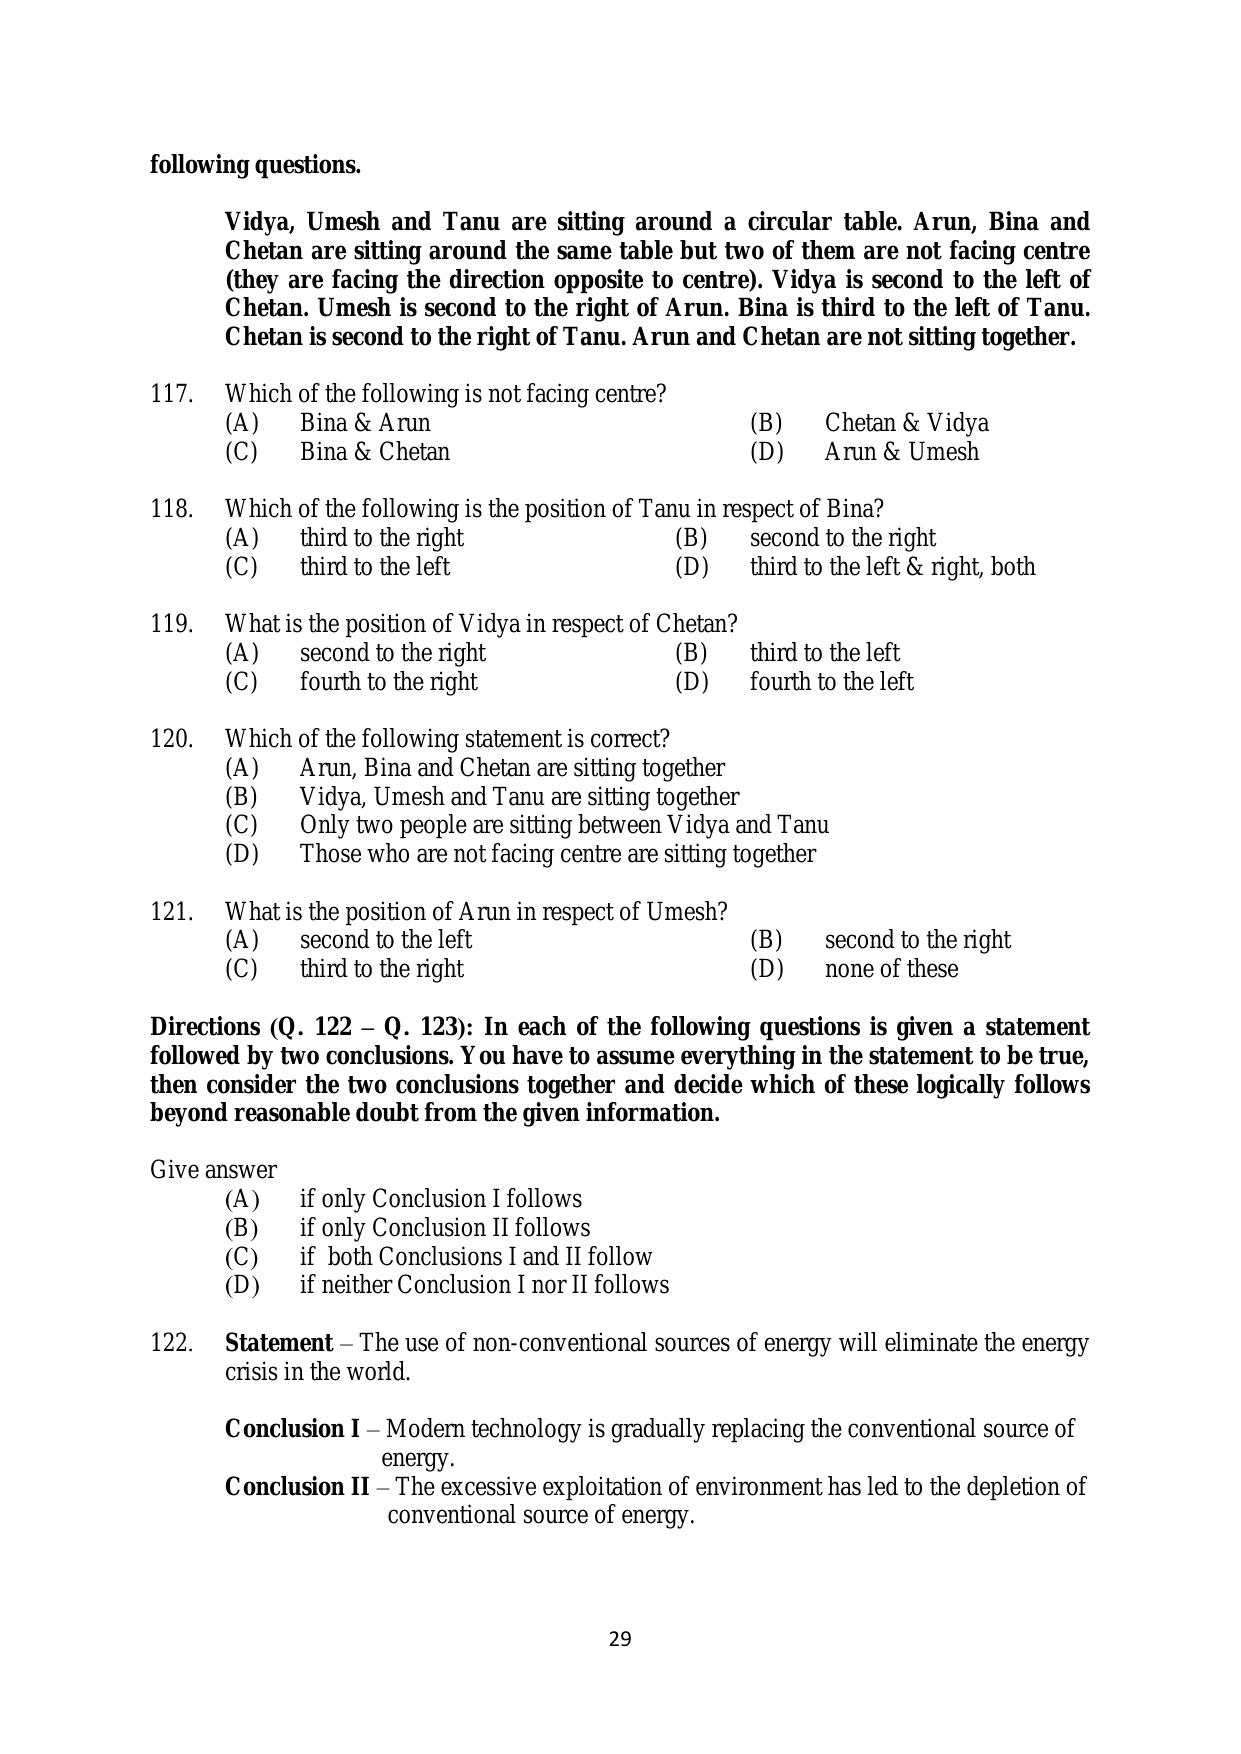 AILET 2020 Question Paper for BA LLB - Page 29